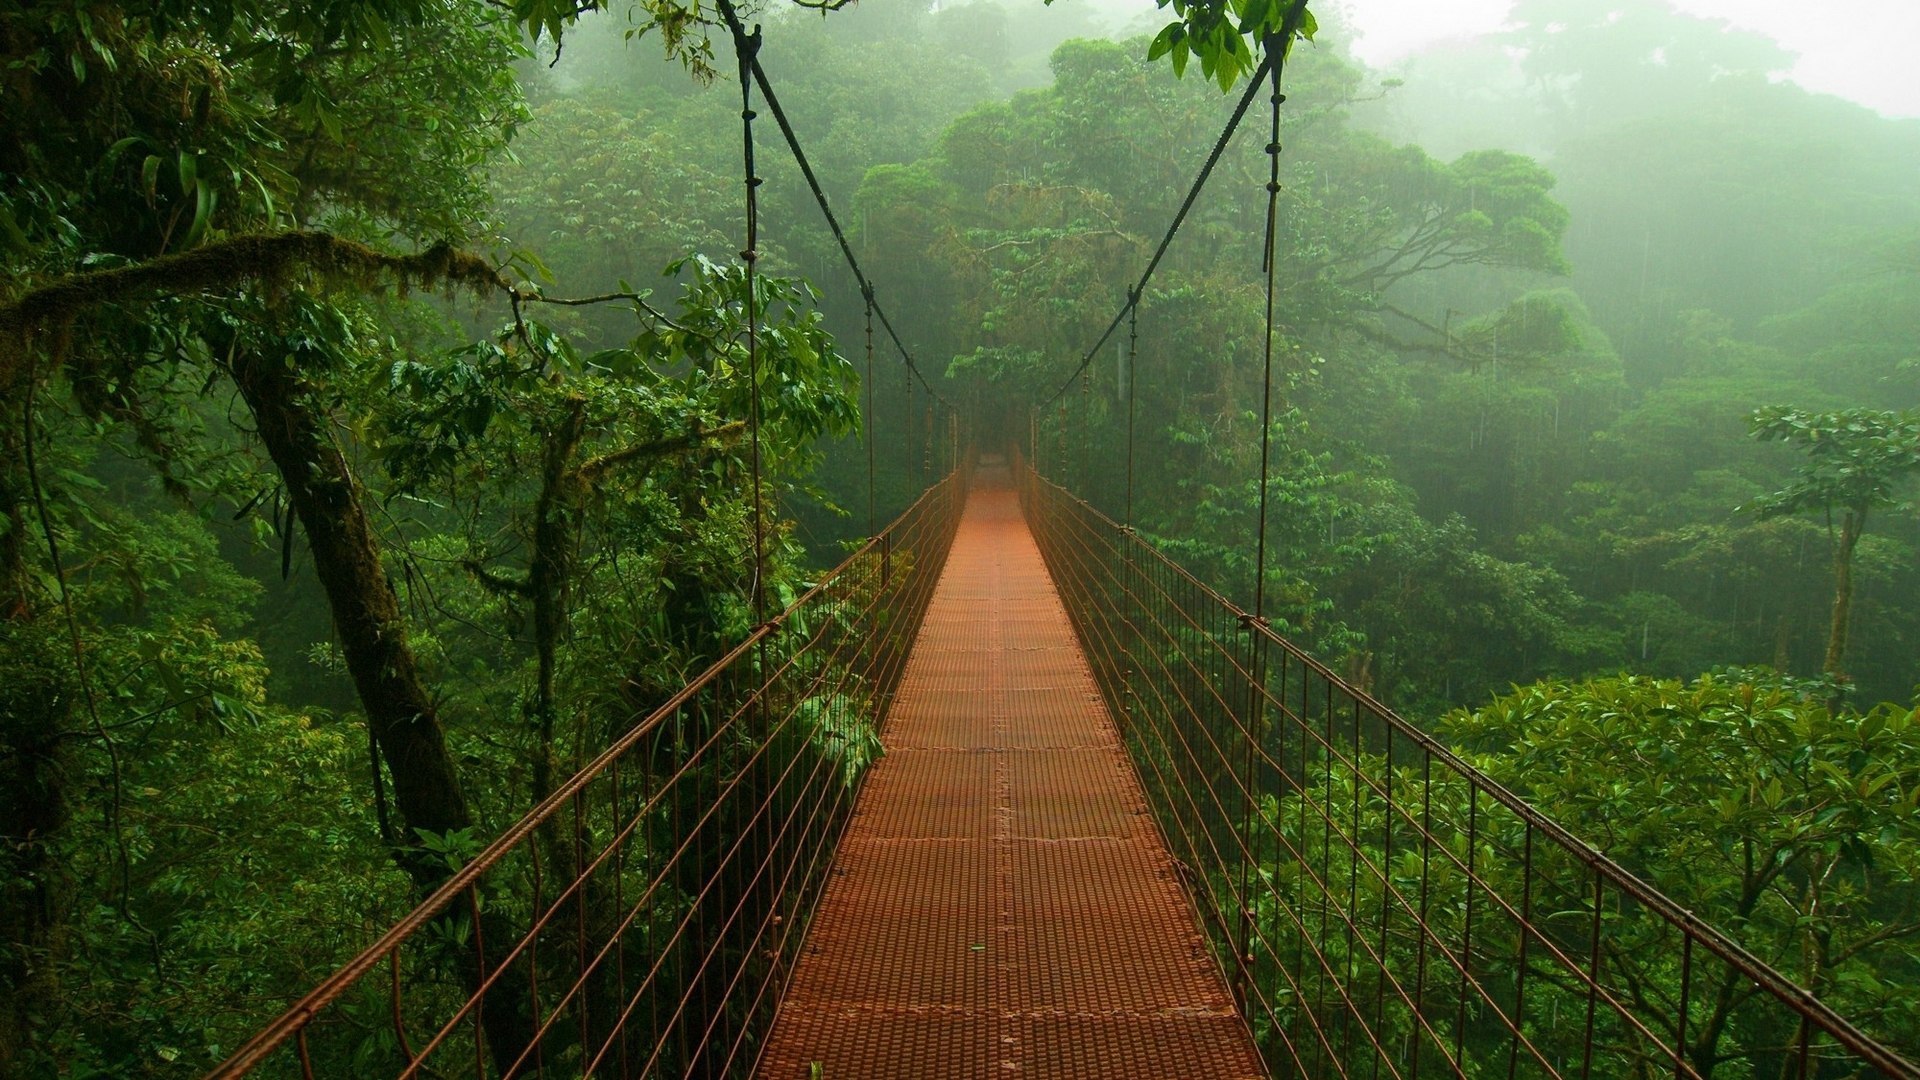 Bridge In The Forests Of The Amazon Wallpapers And Images Wallpapers Pictures Photos